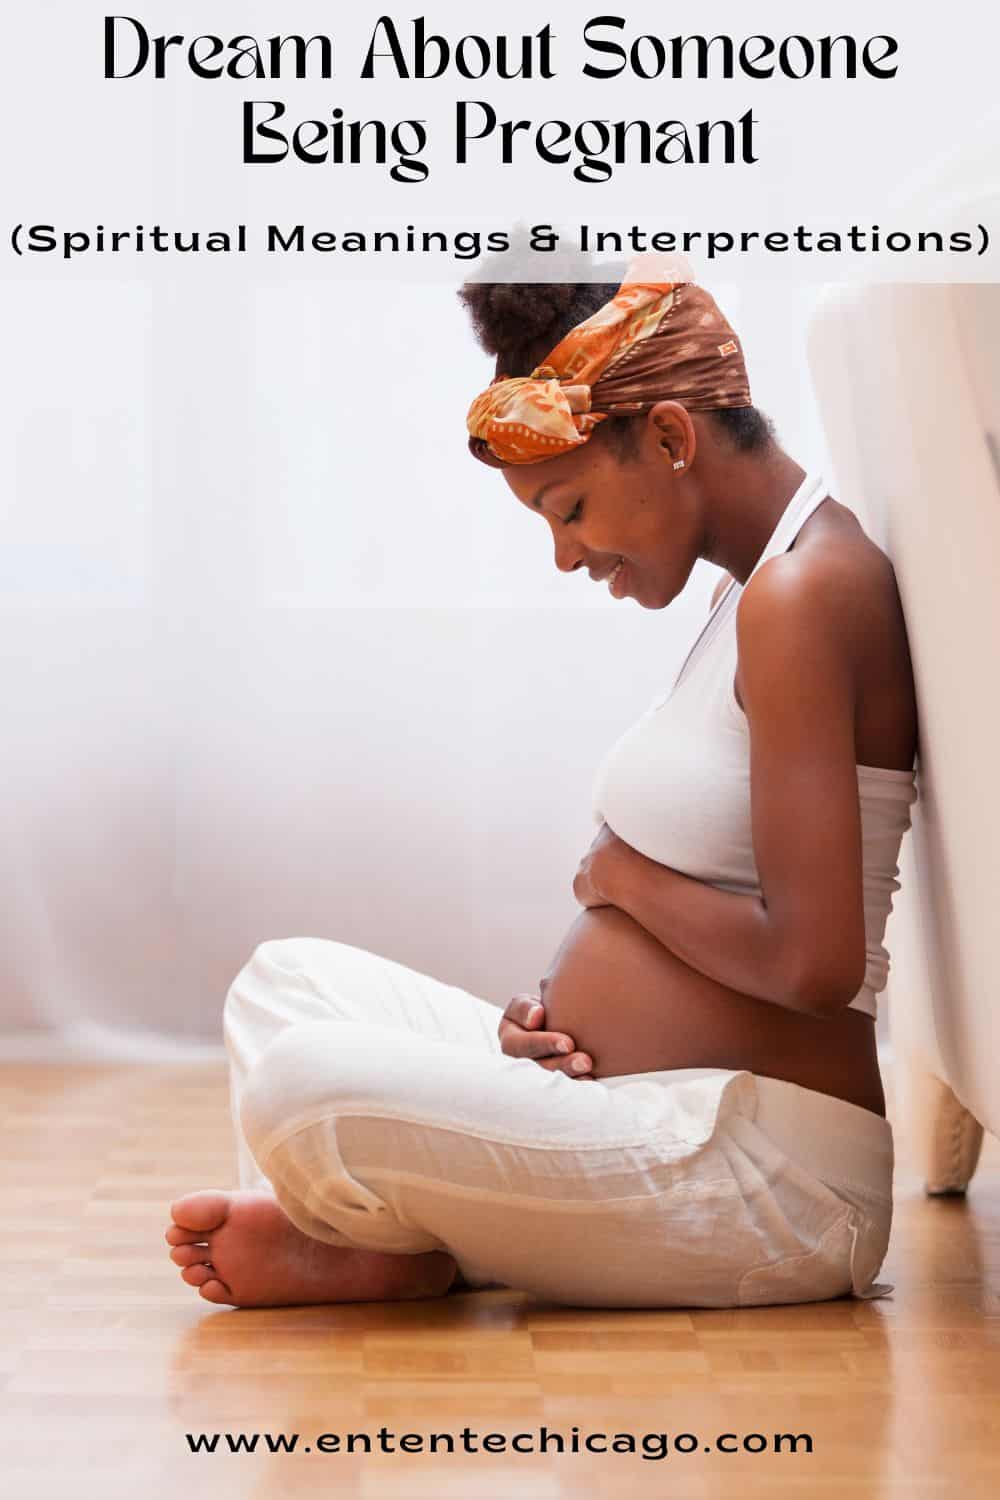 Dream About Someone Being Pregnant (Spiritual Meanings & Interpretations)